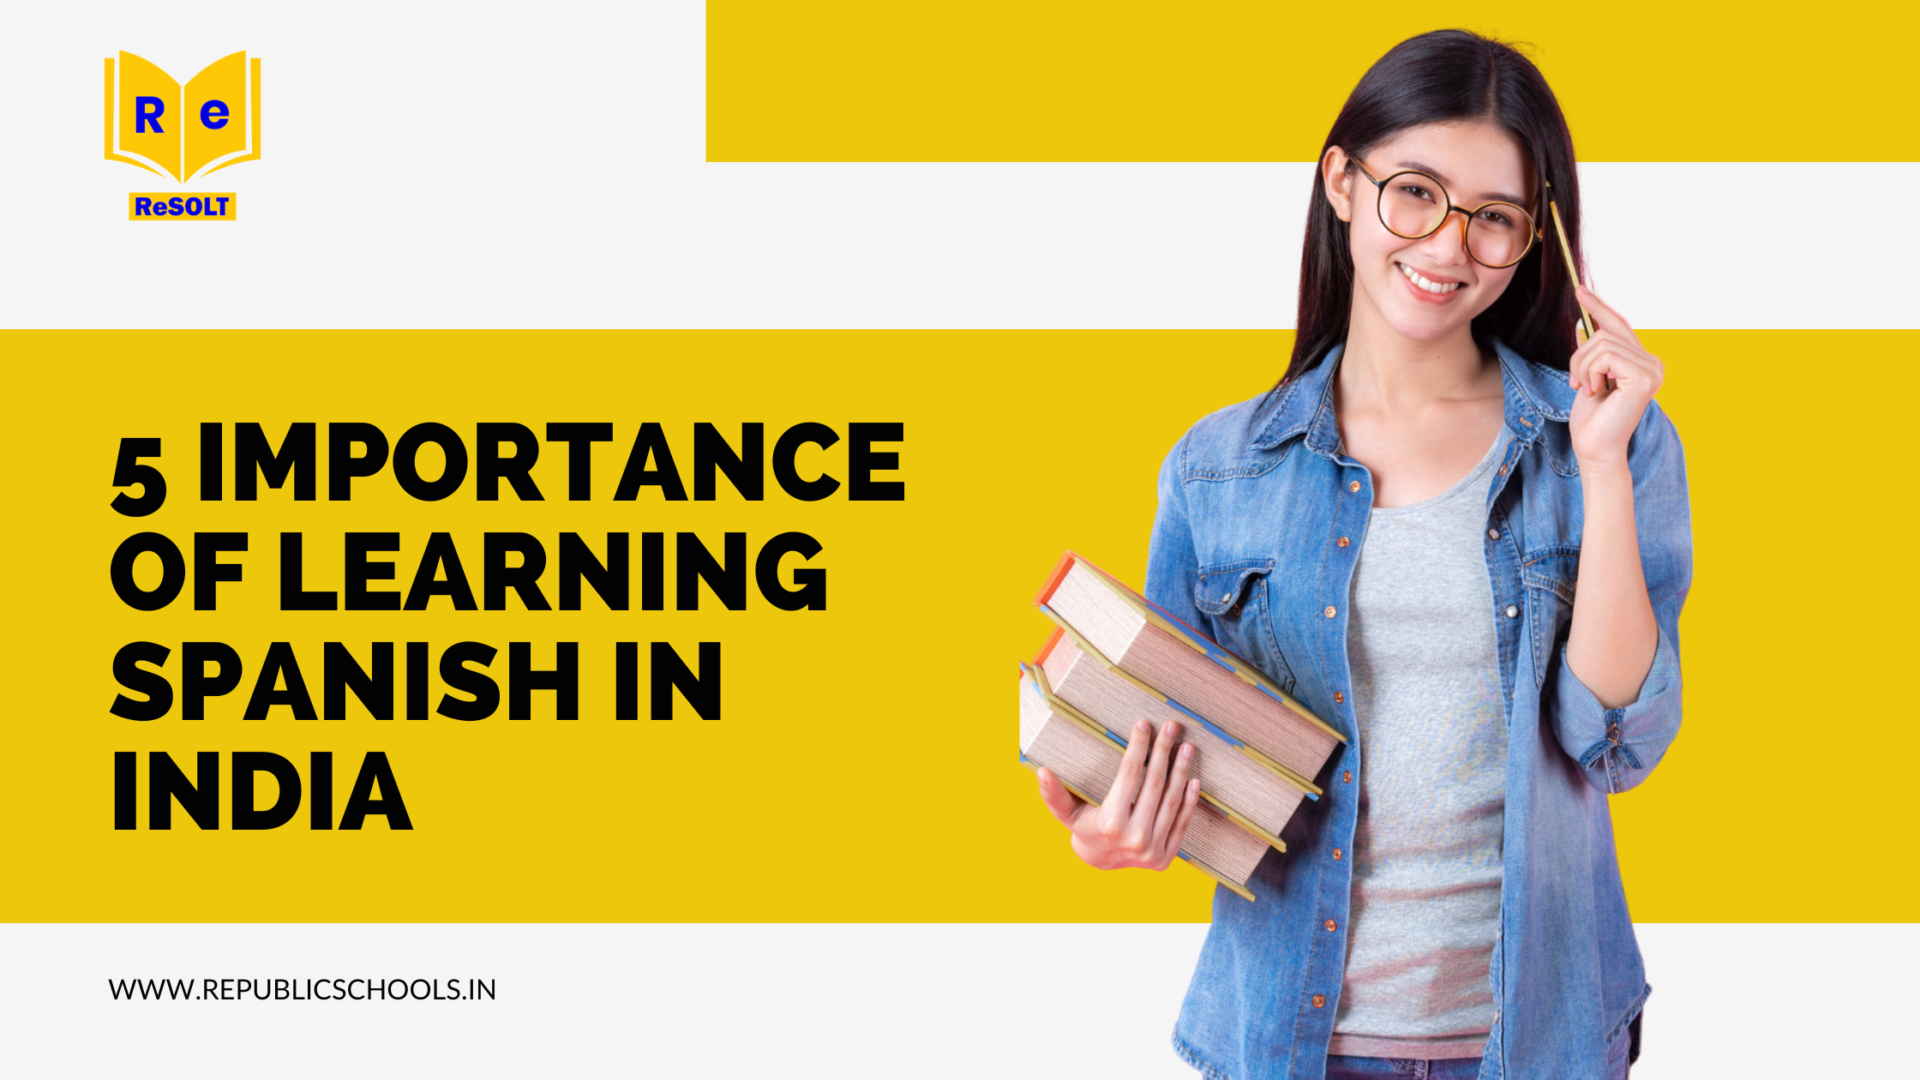 5 Importance of Learning Spanish in India